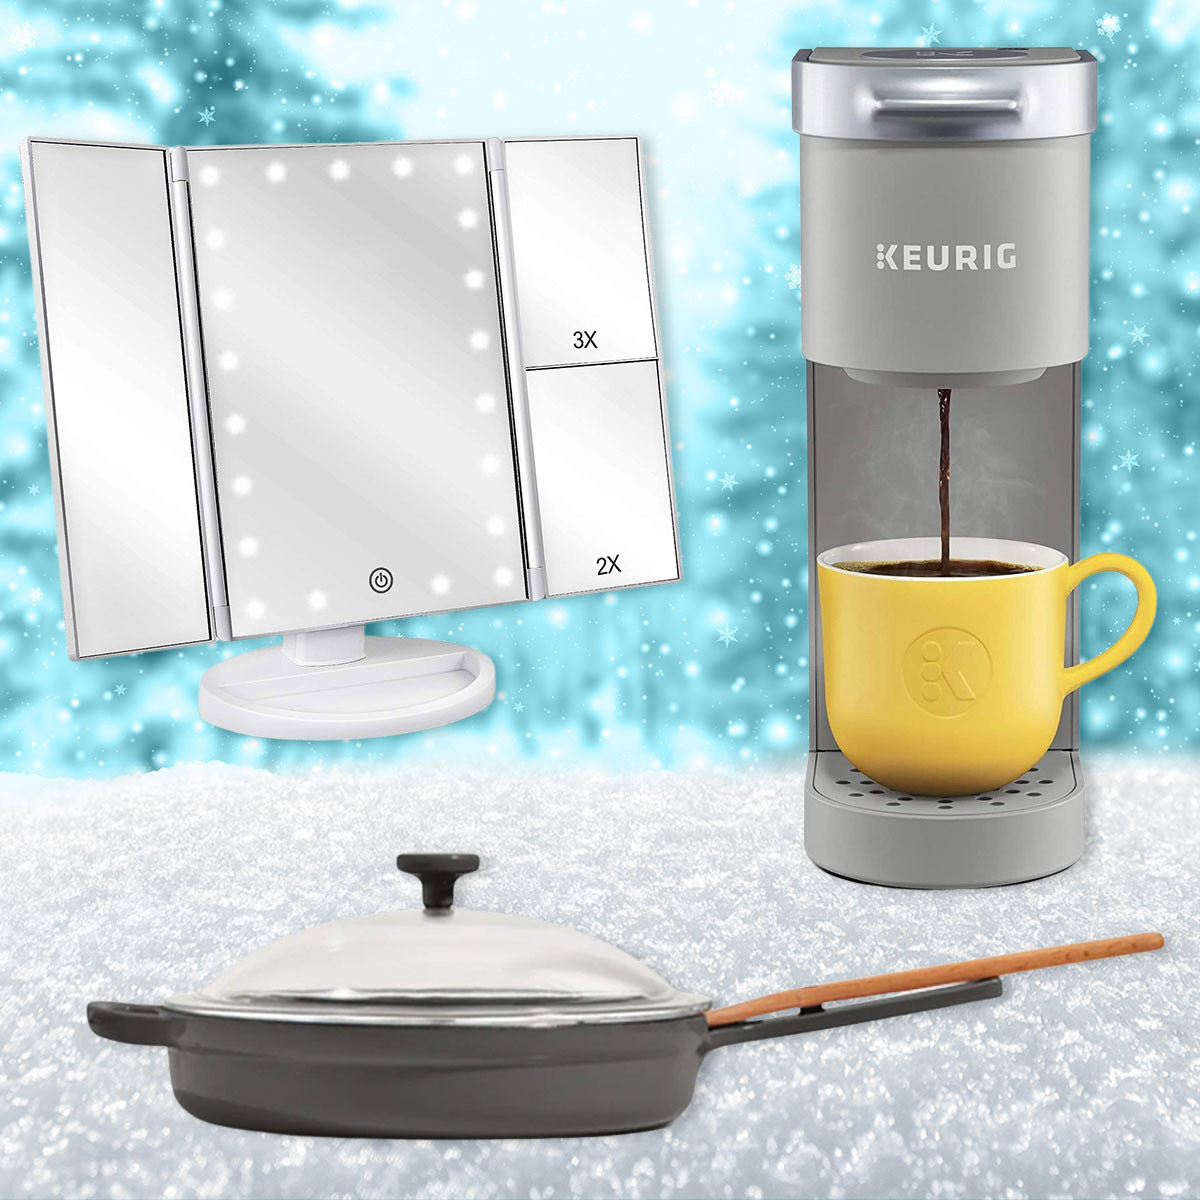 20 Small Christmas Gifts for Holiday Guests that are Practical